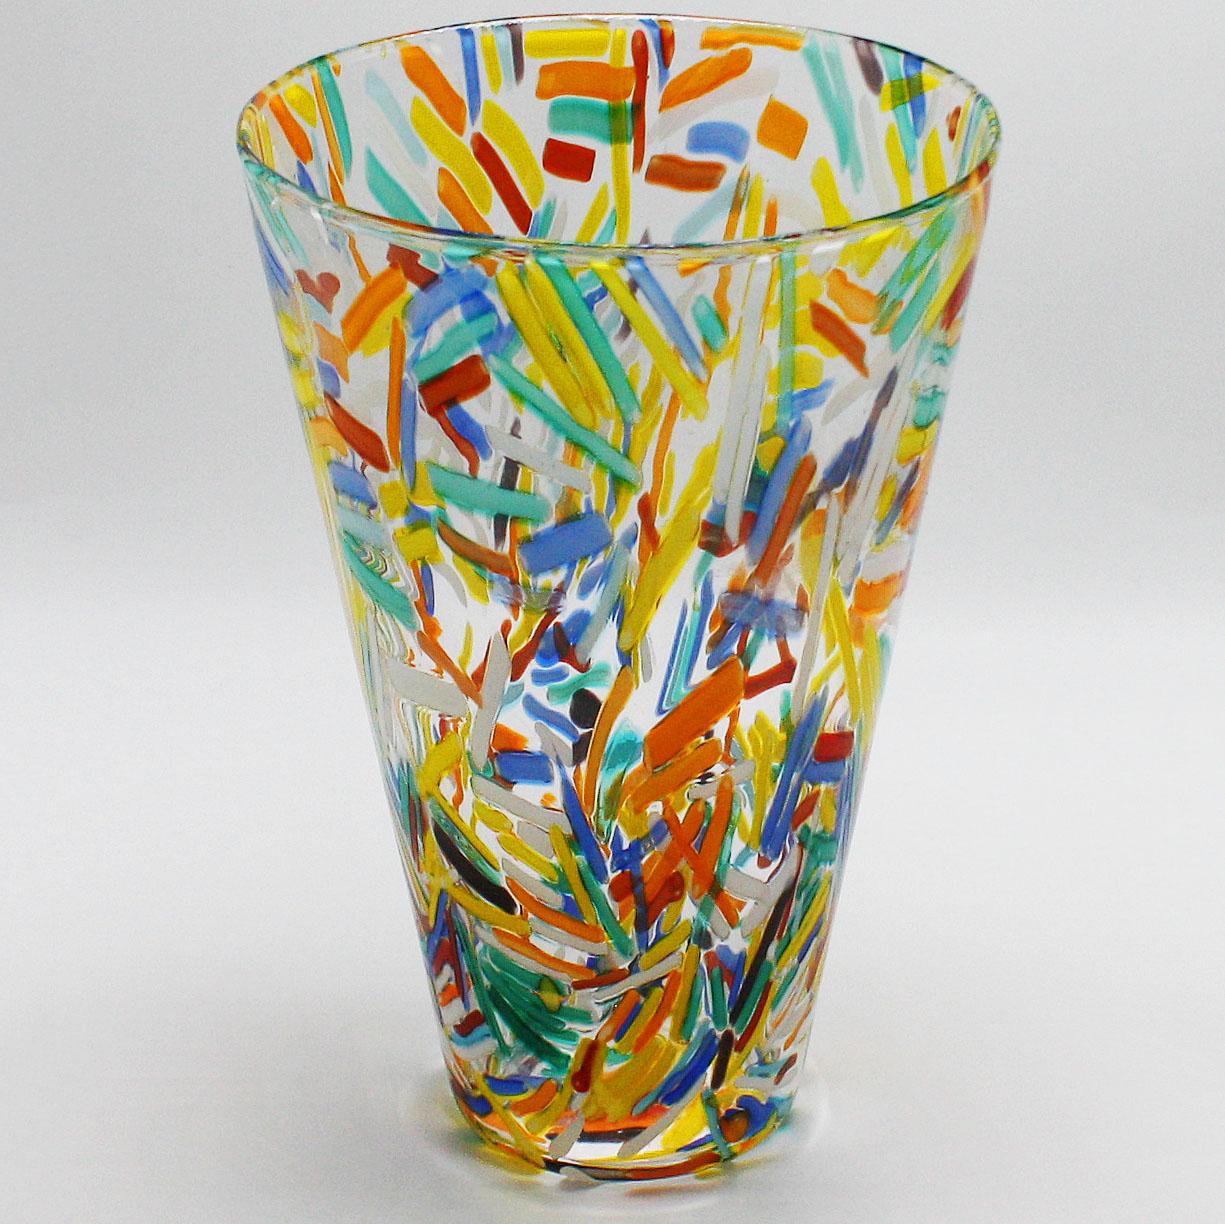 Murano glass vase with colorful etched detailing, circa 1960.
$1200.